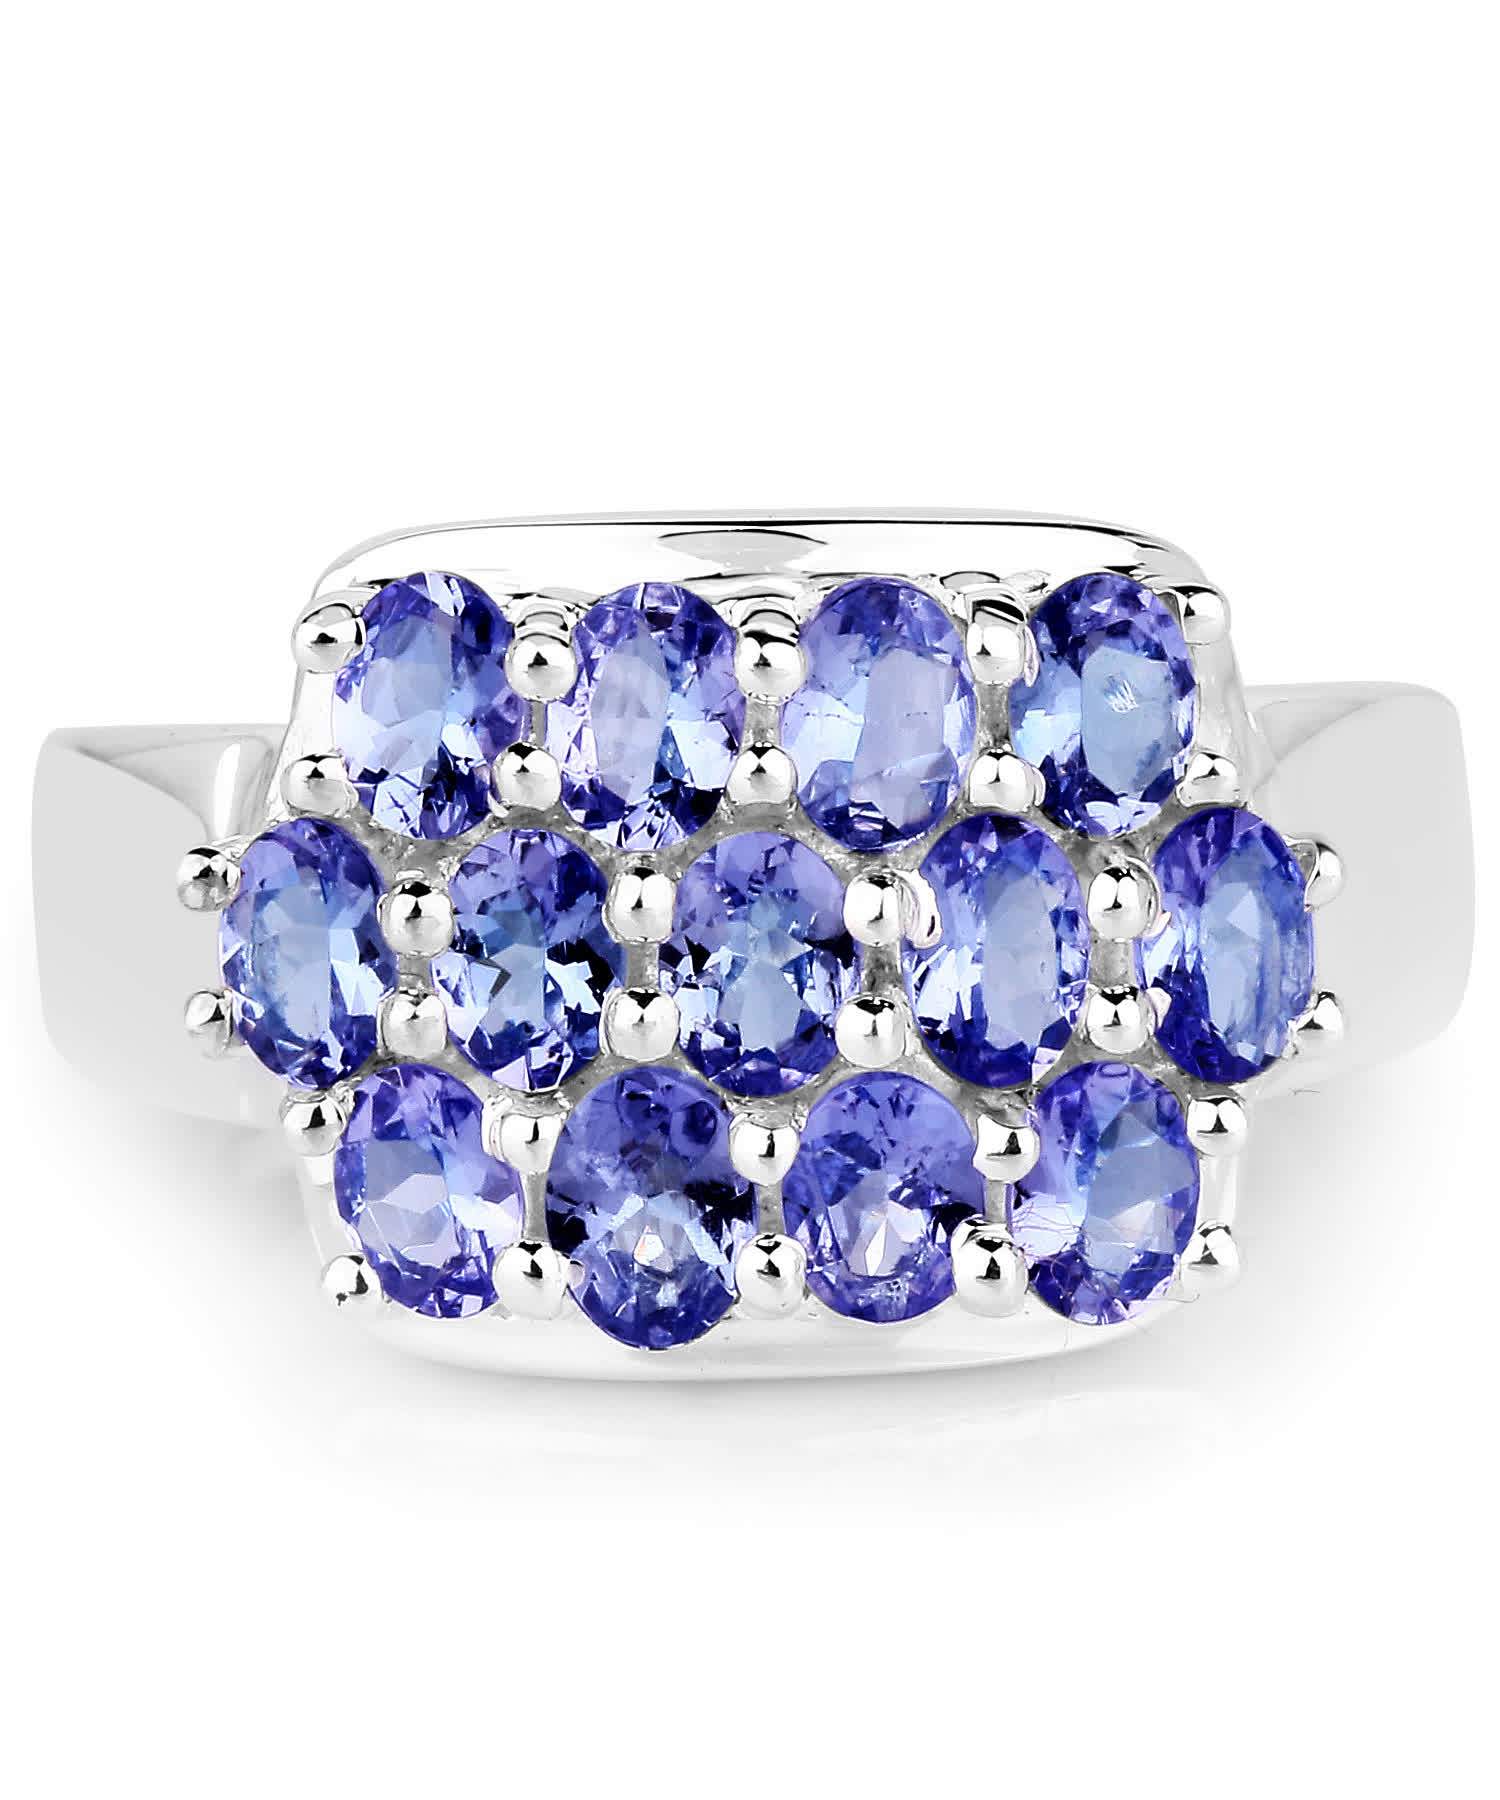 2.21ctw Natural Tanzanite Rhodium Plated 925 Sterling Silver Cluster Ring View 3